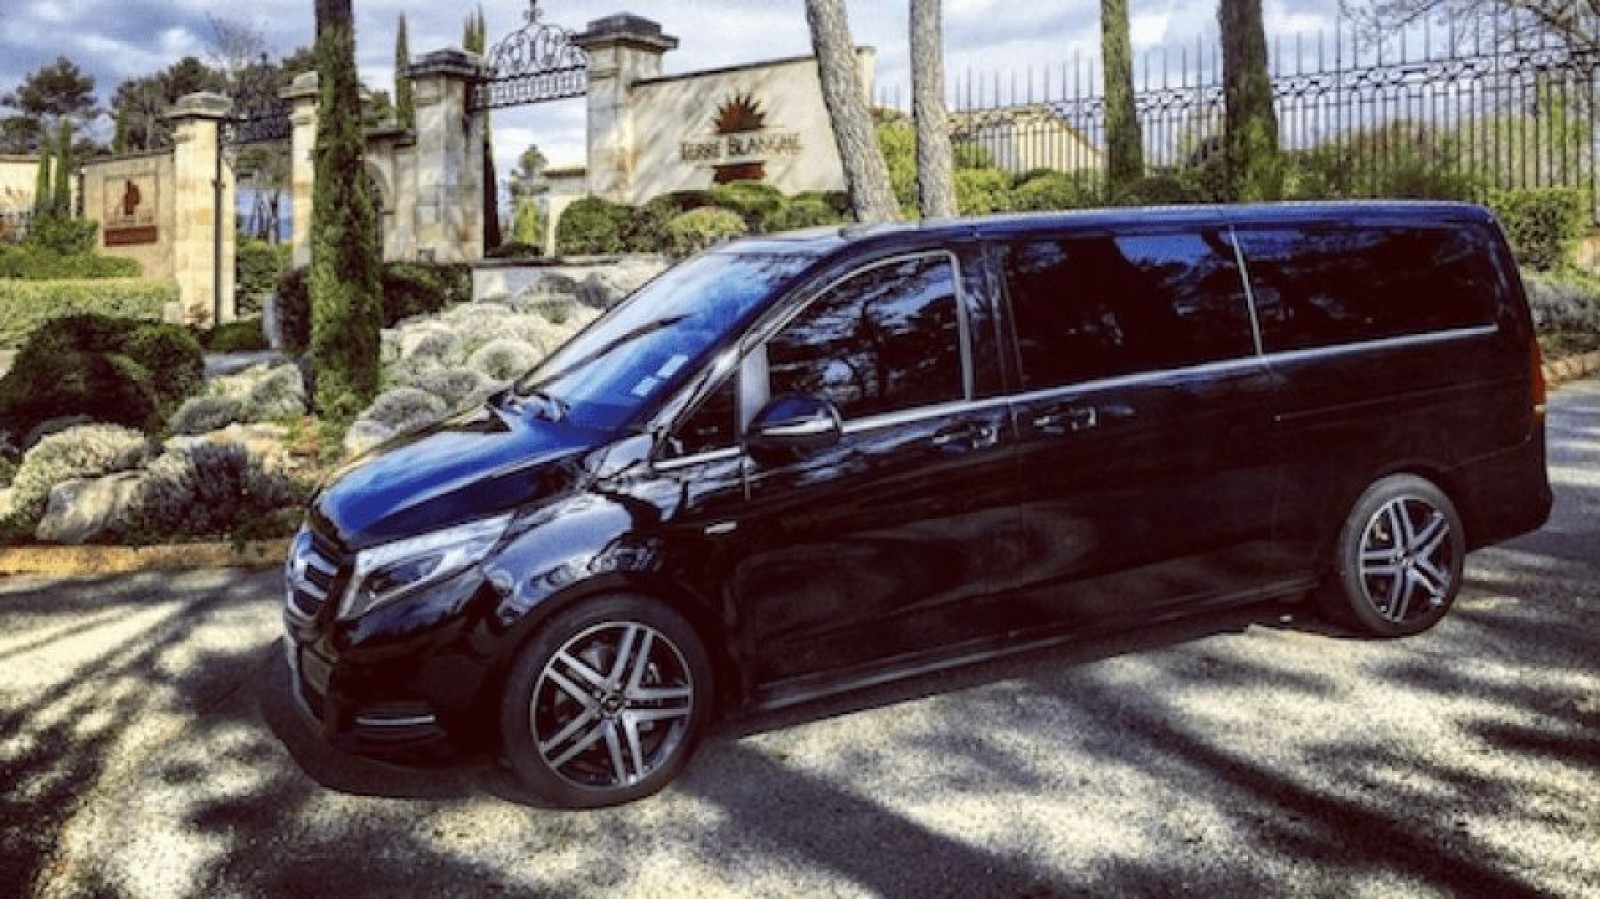 Transfert Marseille Airport - Book your transfer 24/7 - Ruby Services - Book Your Transfer From Marseille Airport With Private Chauffeur. 